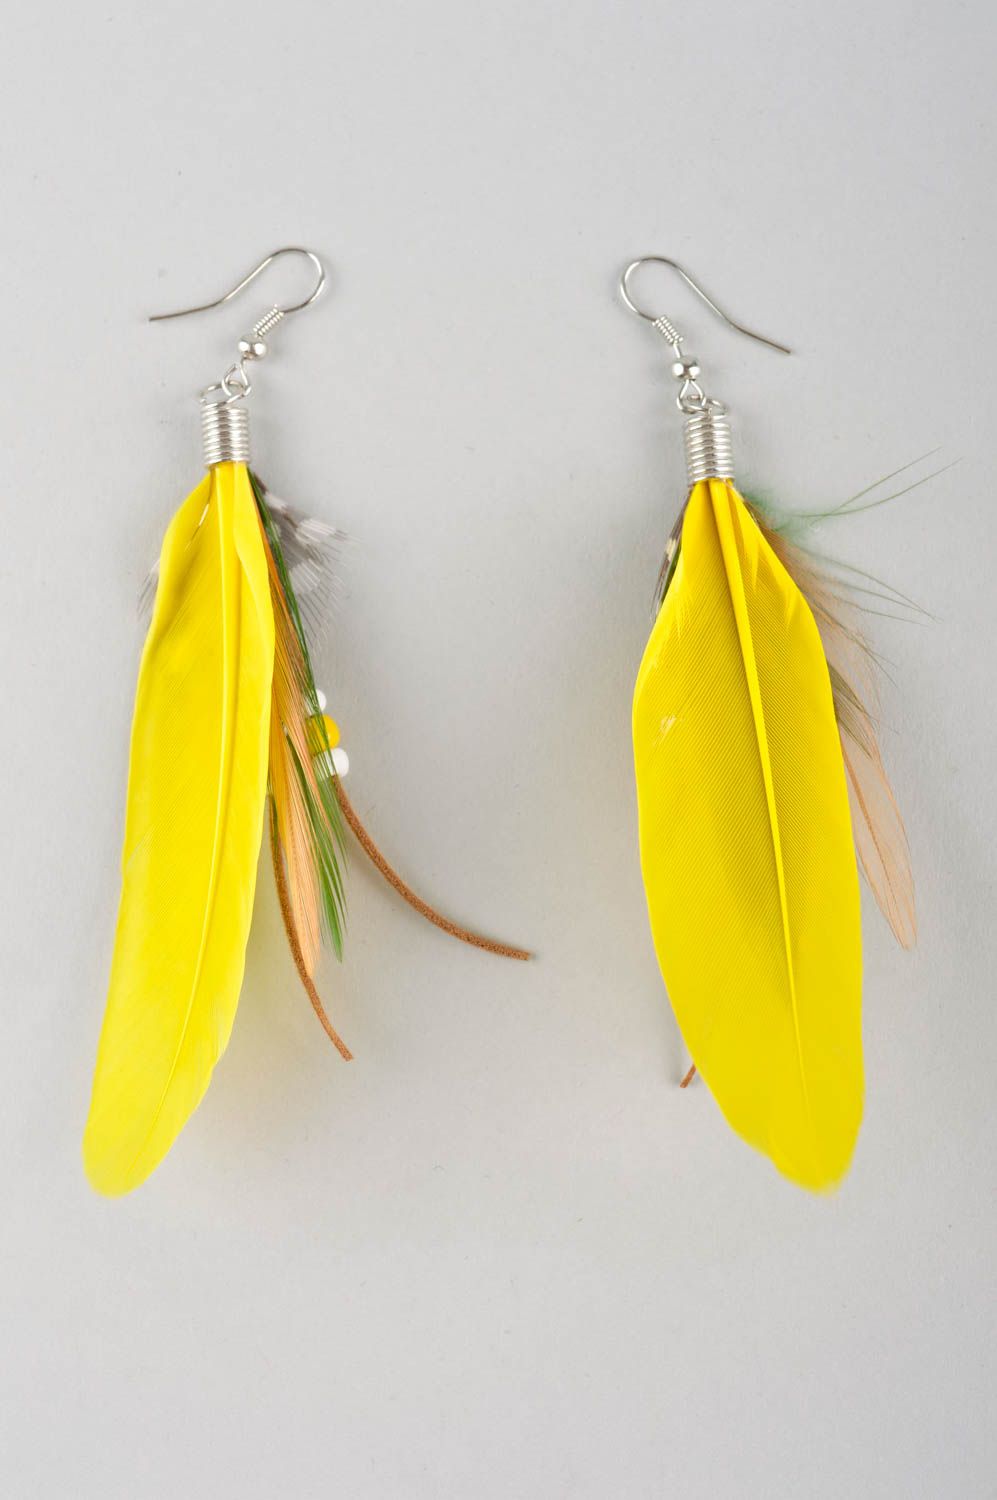 Handmade earrings with charms feather earrings long earrings fashion accessories photo 4